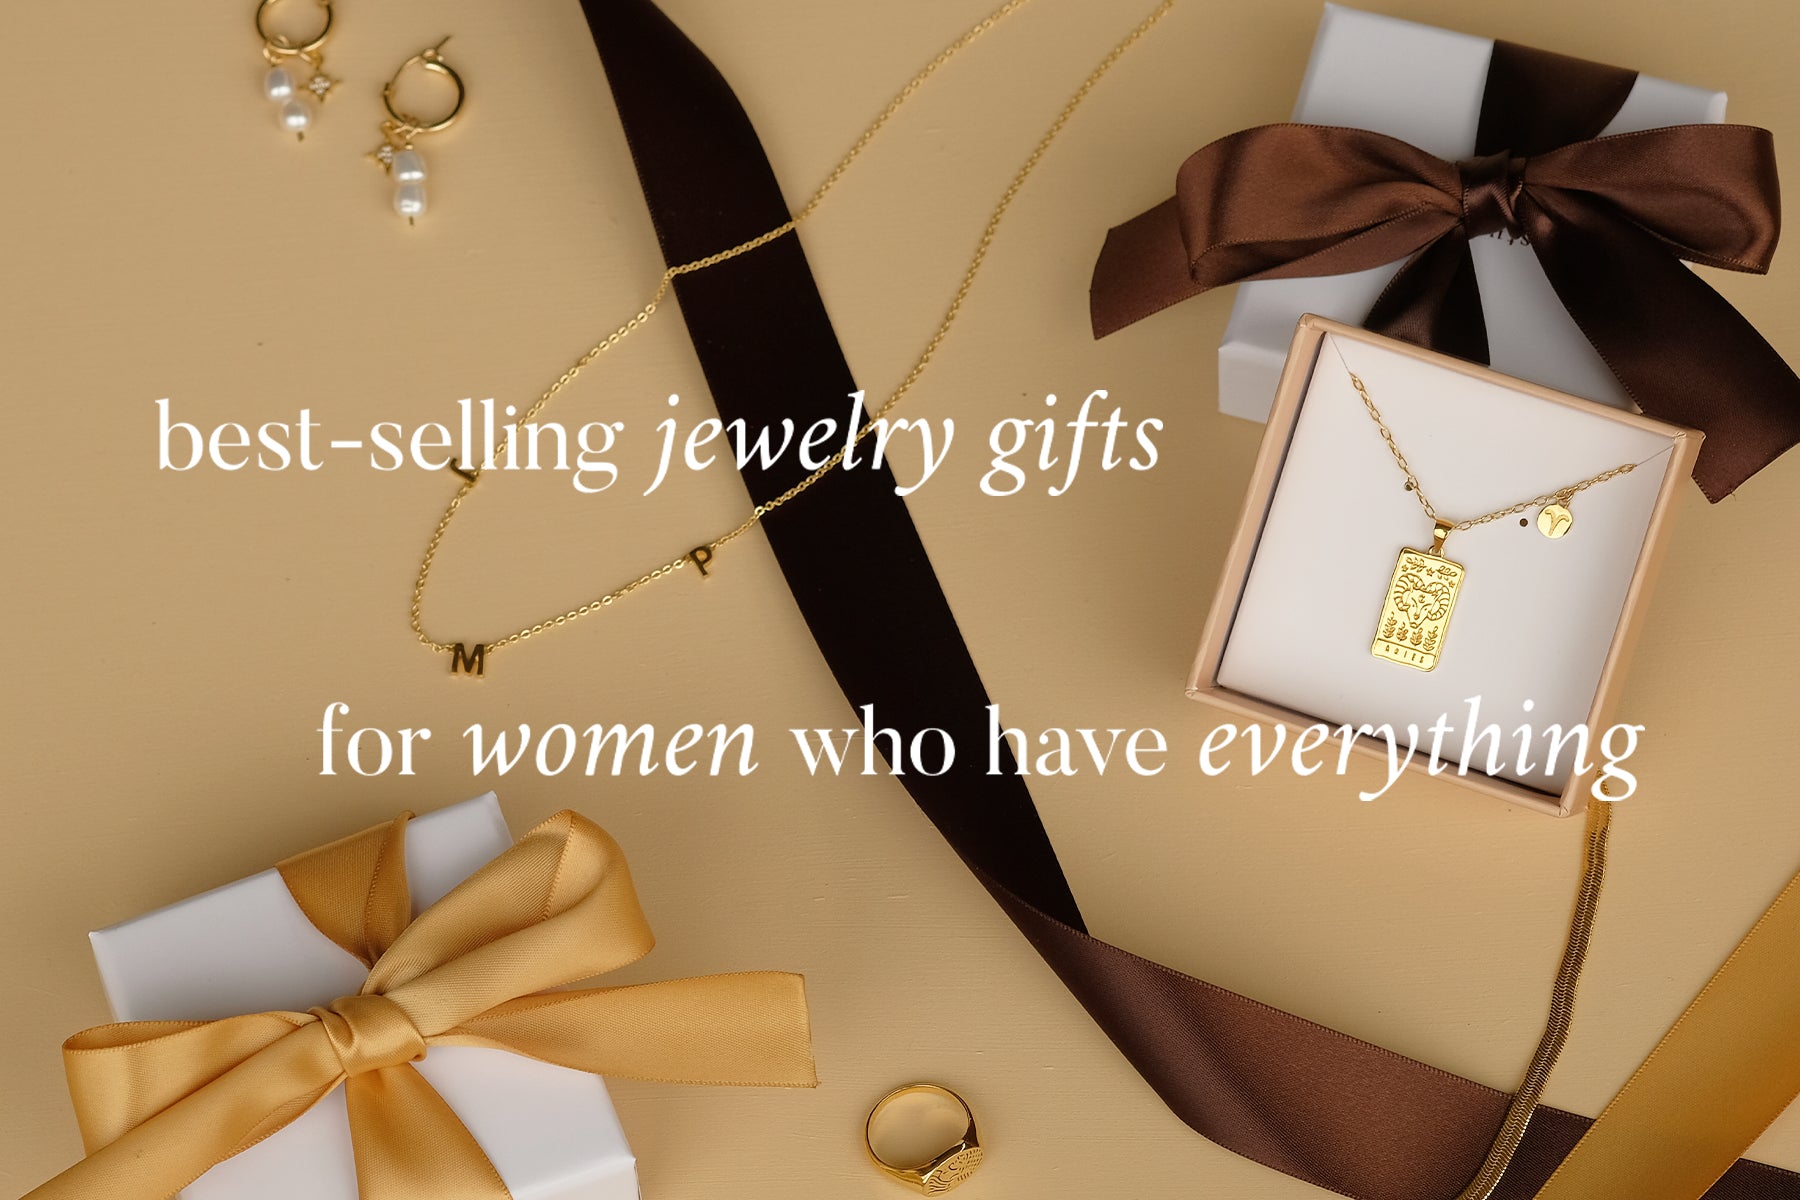 10 Best Selling Jewelry Gifts for Women Who Have Everything